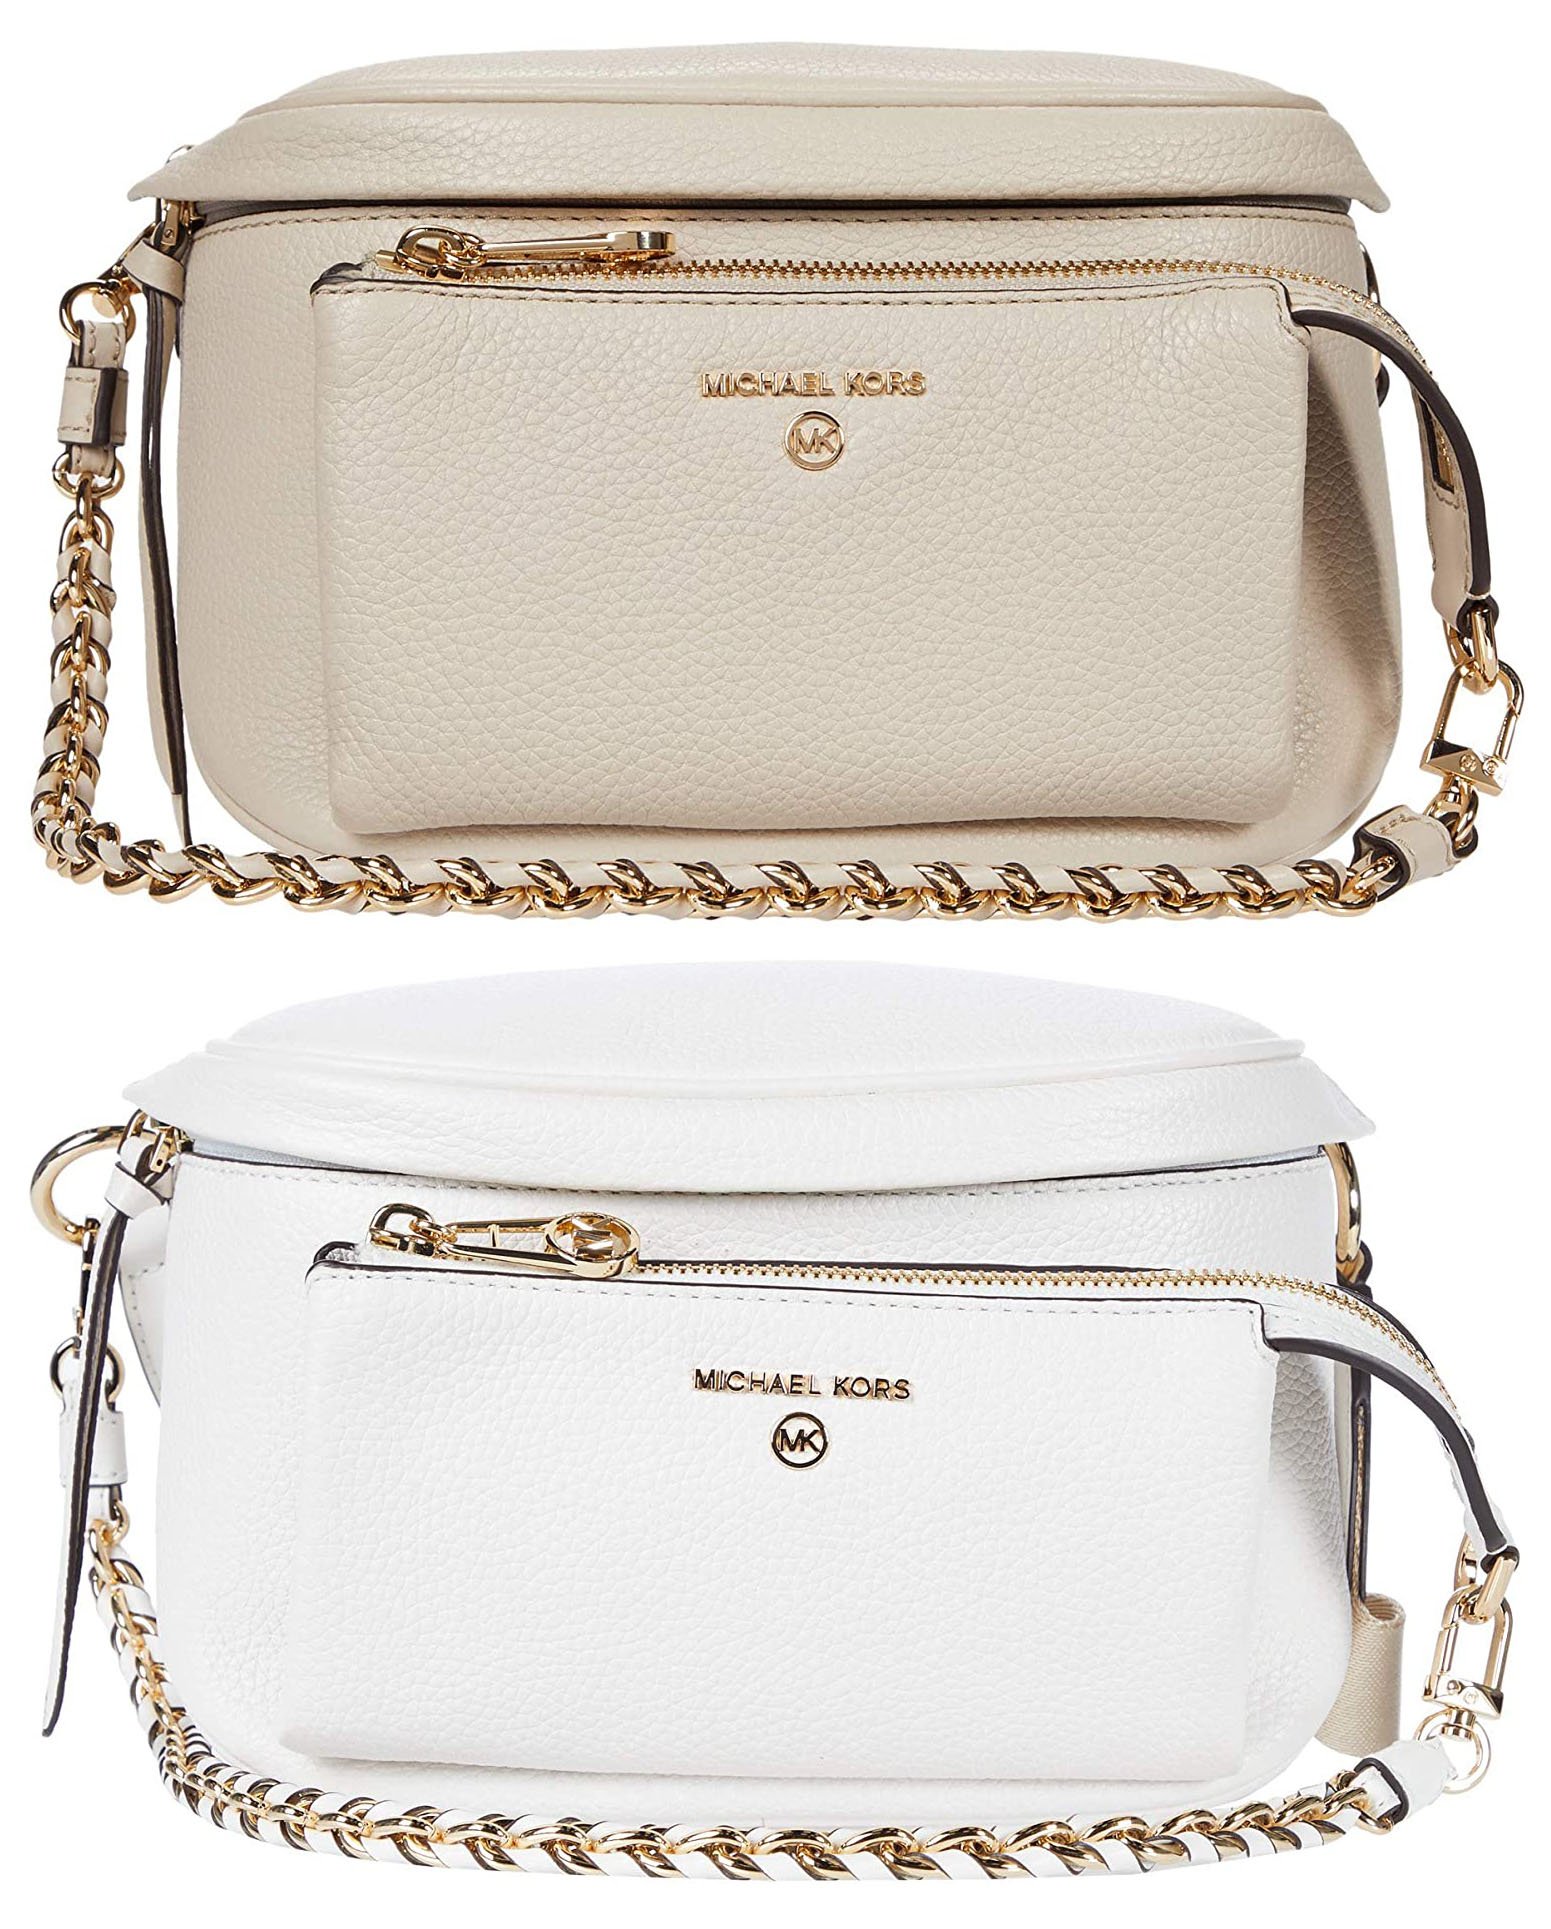 You can wear the Michael Kors' Slater sling pack around the waist, over the shoulder or across the body